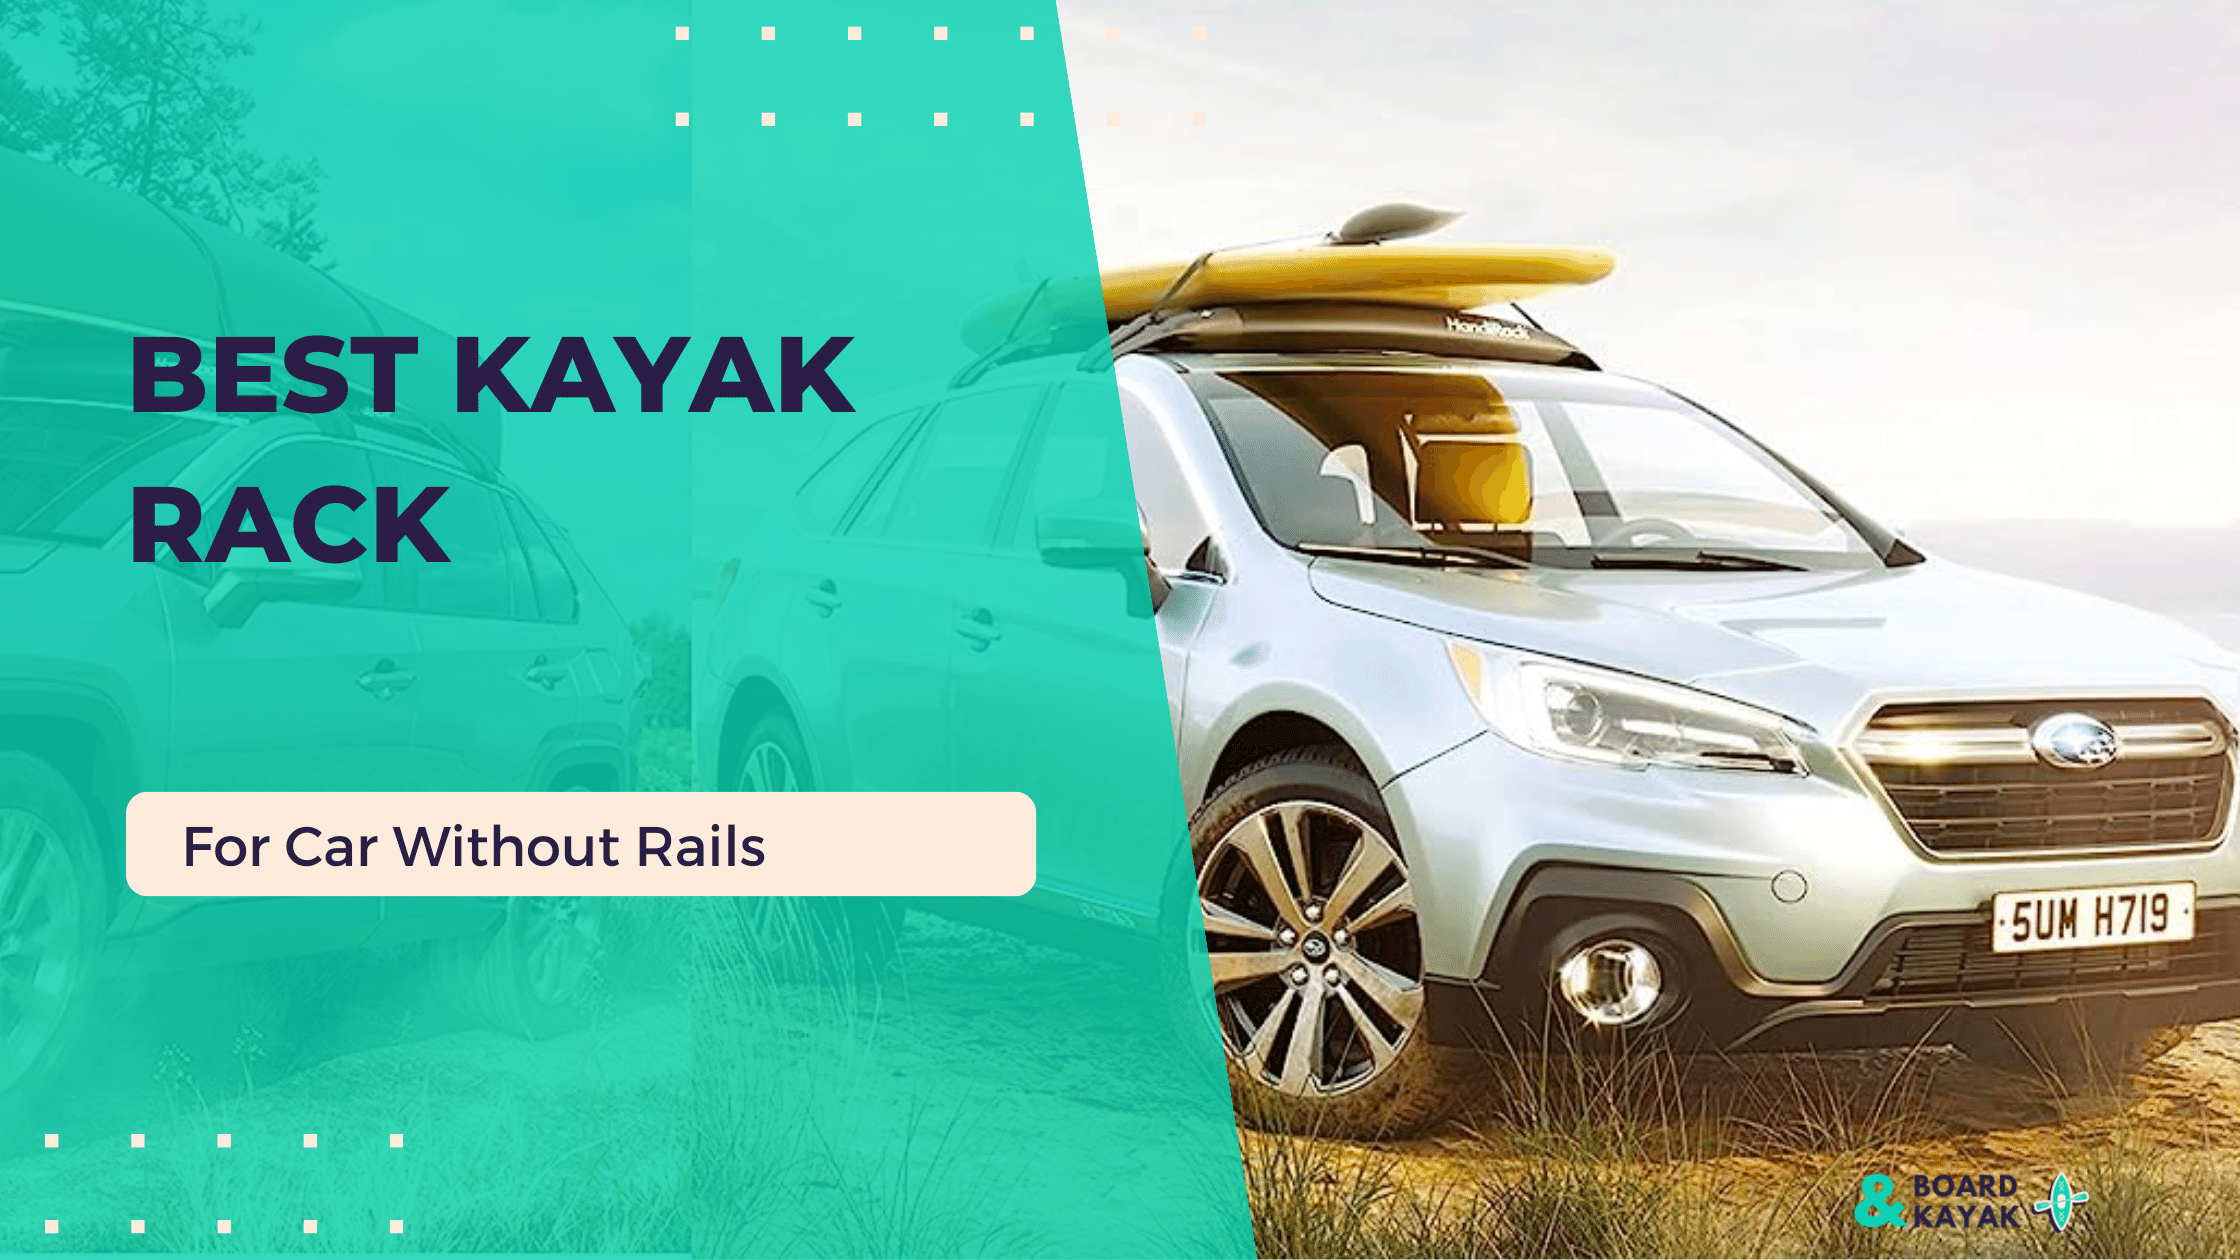 Best Kayak Rack For Car Without Rails